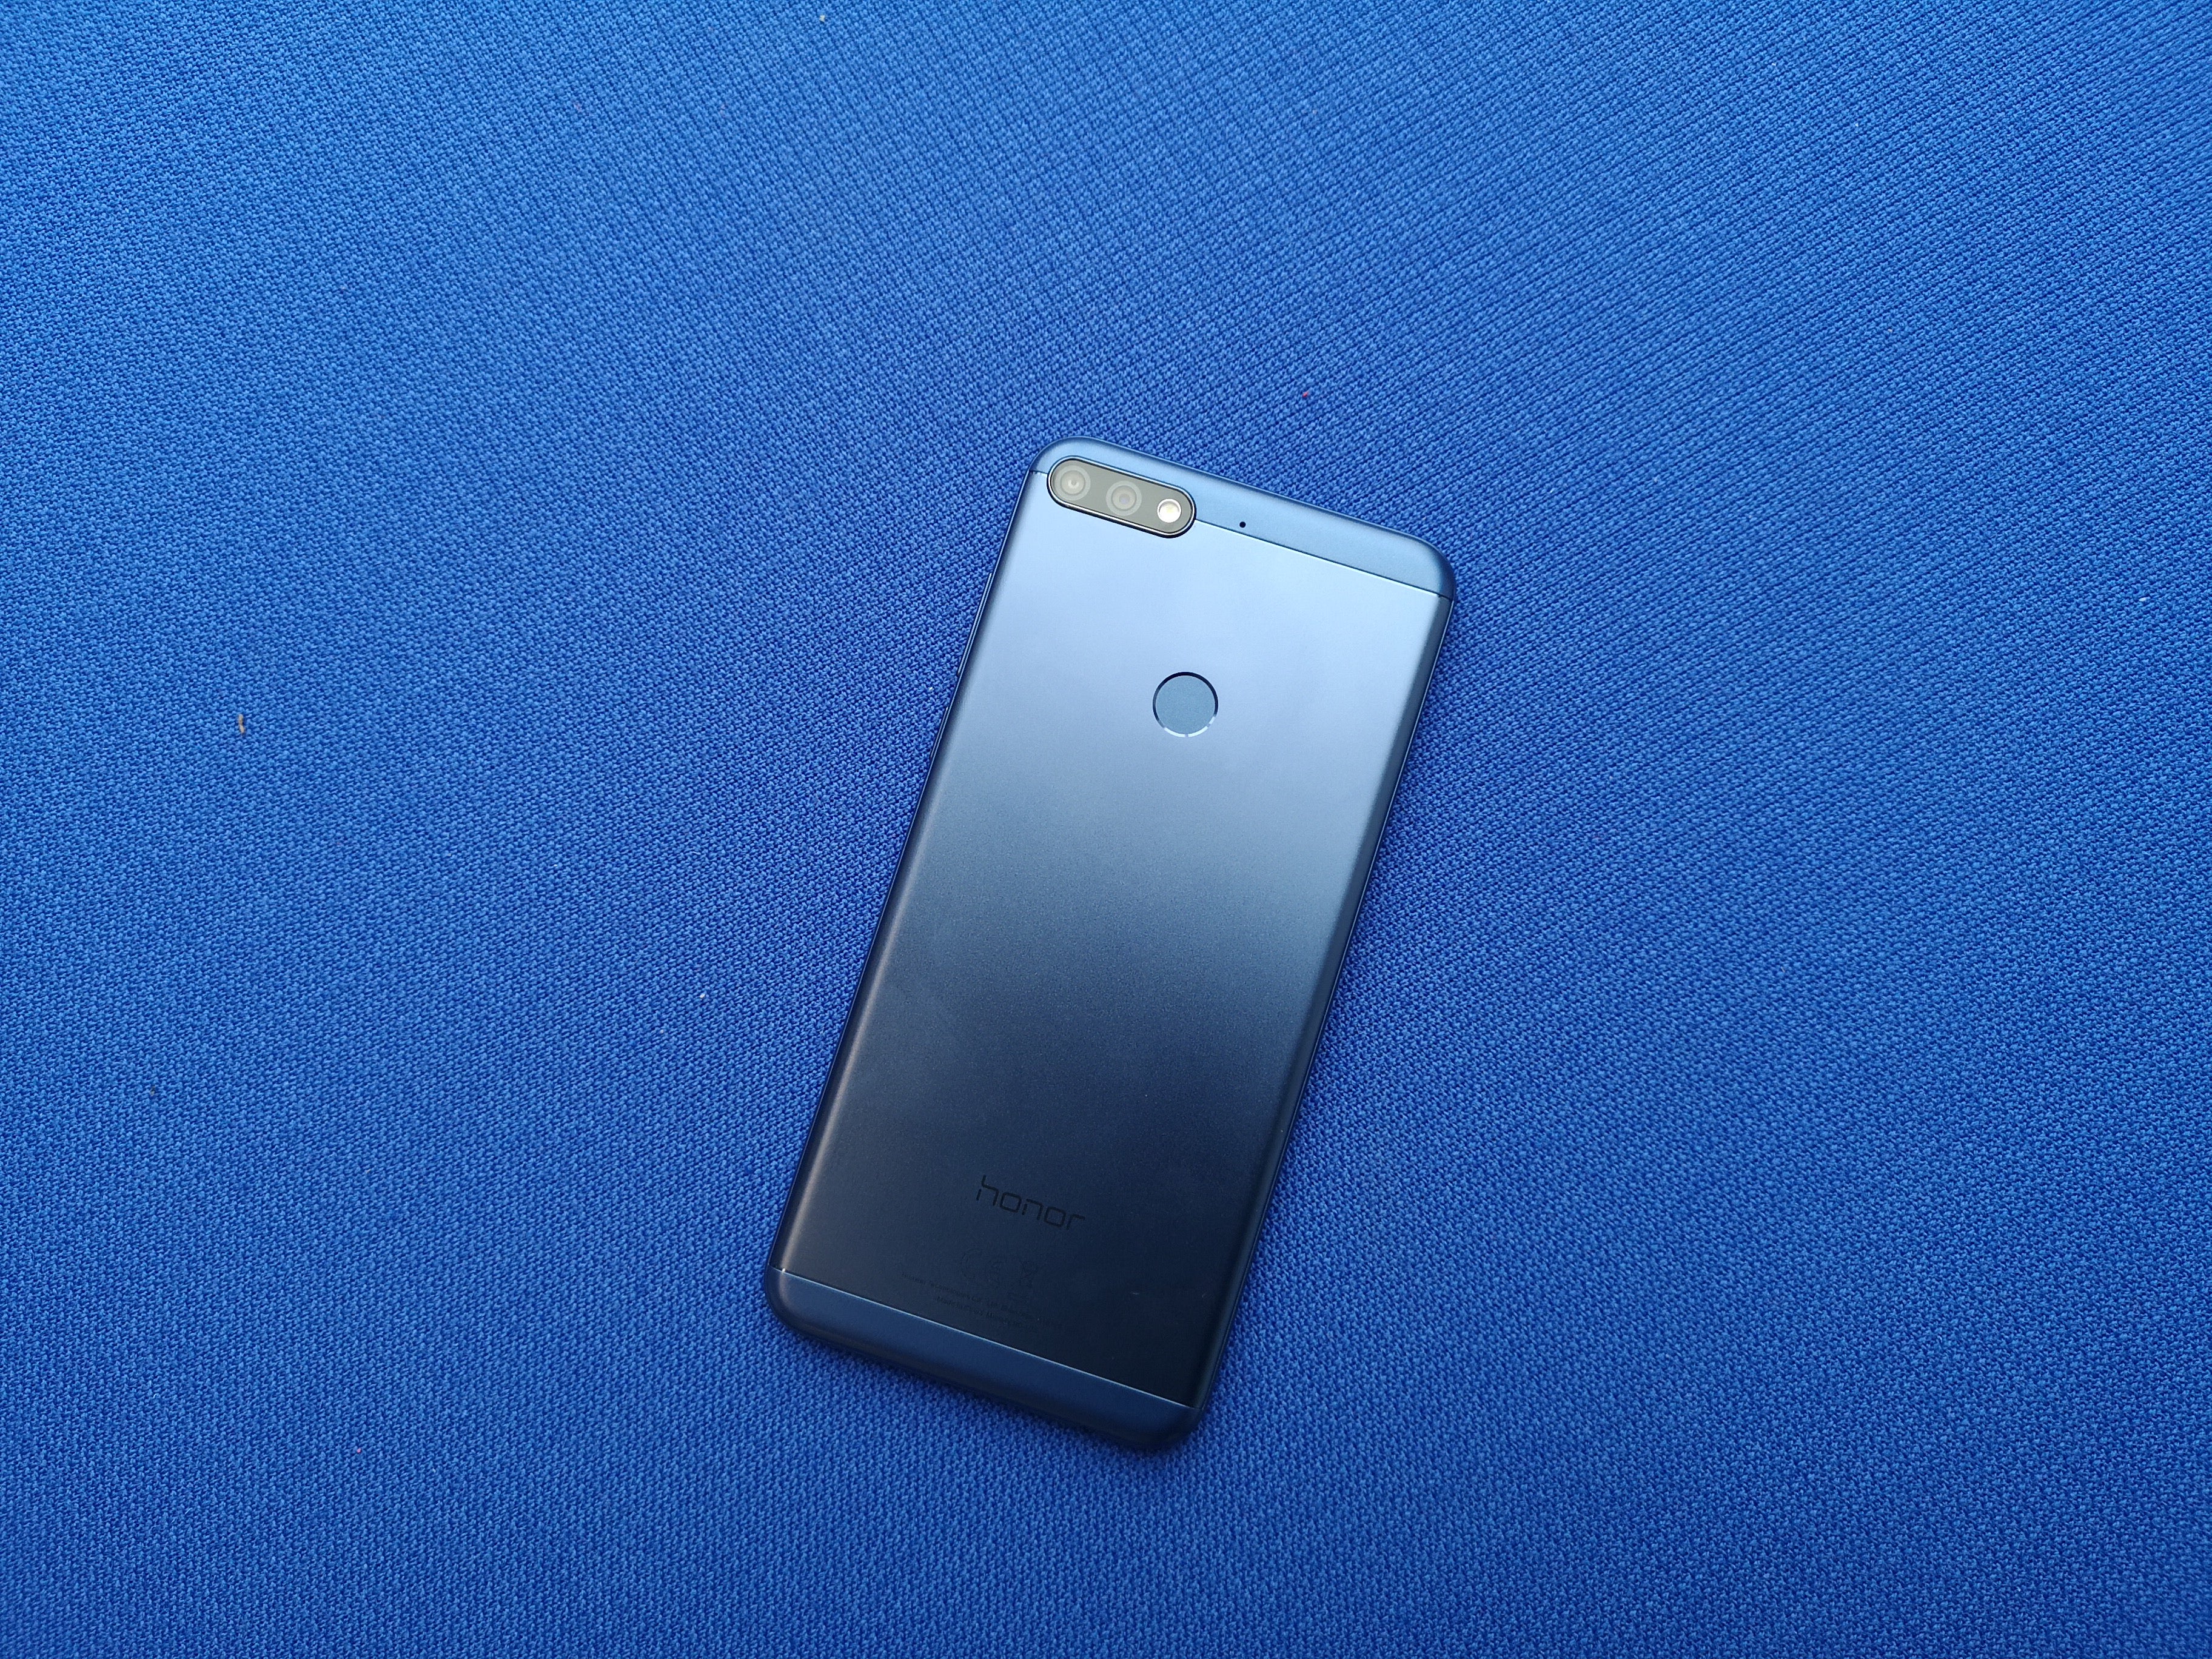 Honor 7C smartphone on blue textured background.